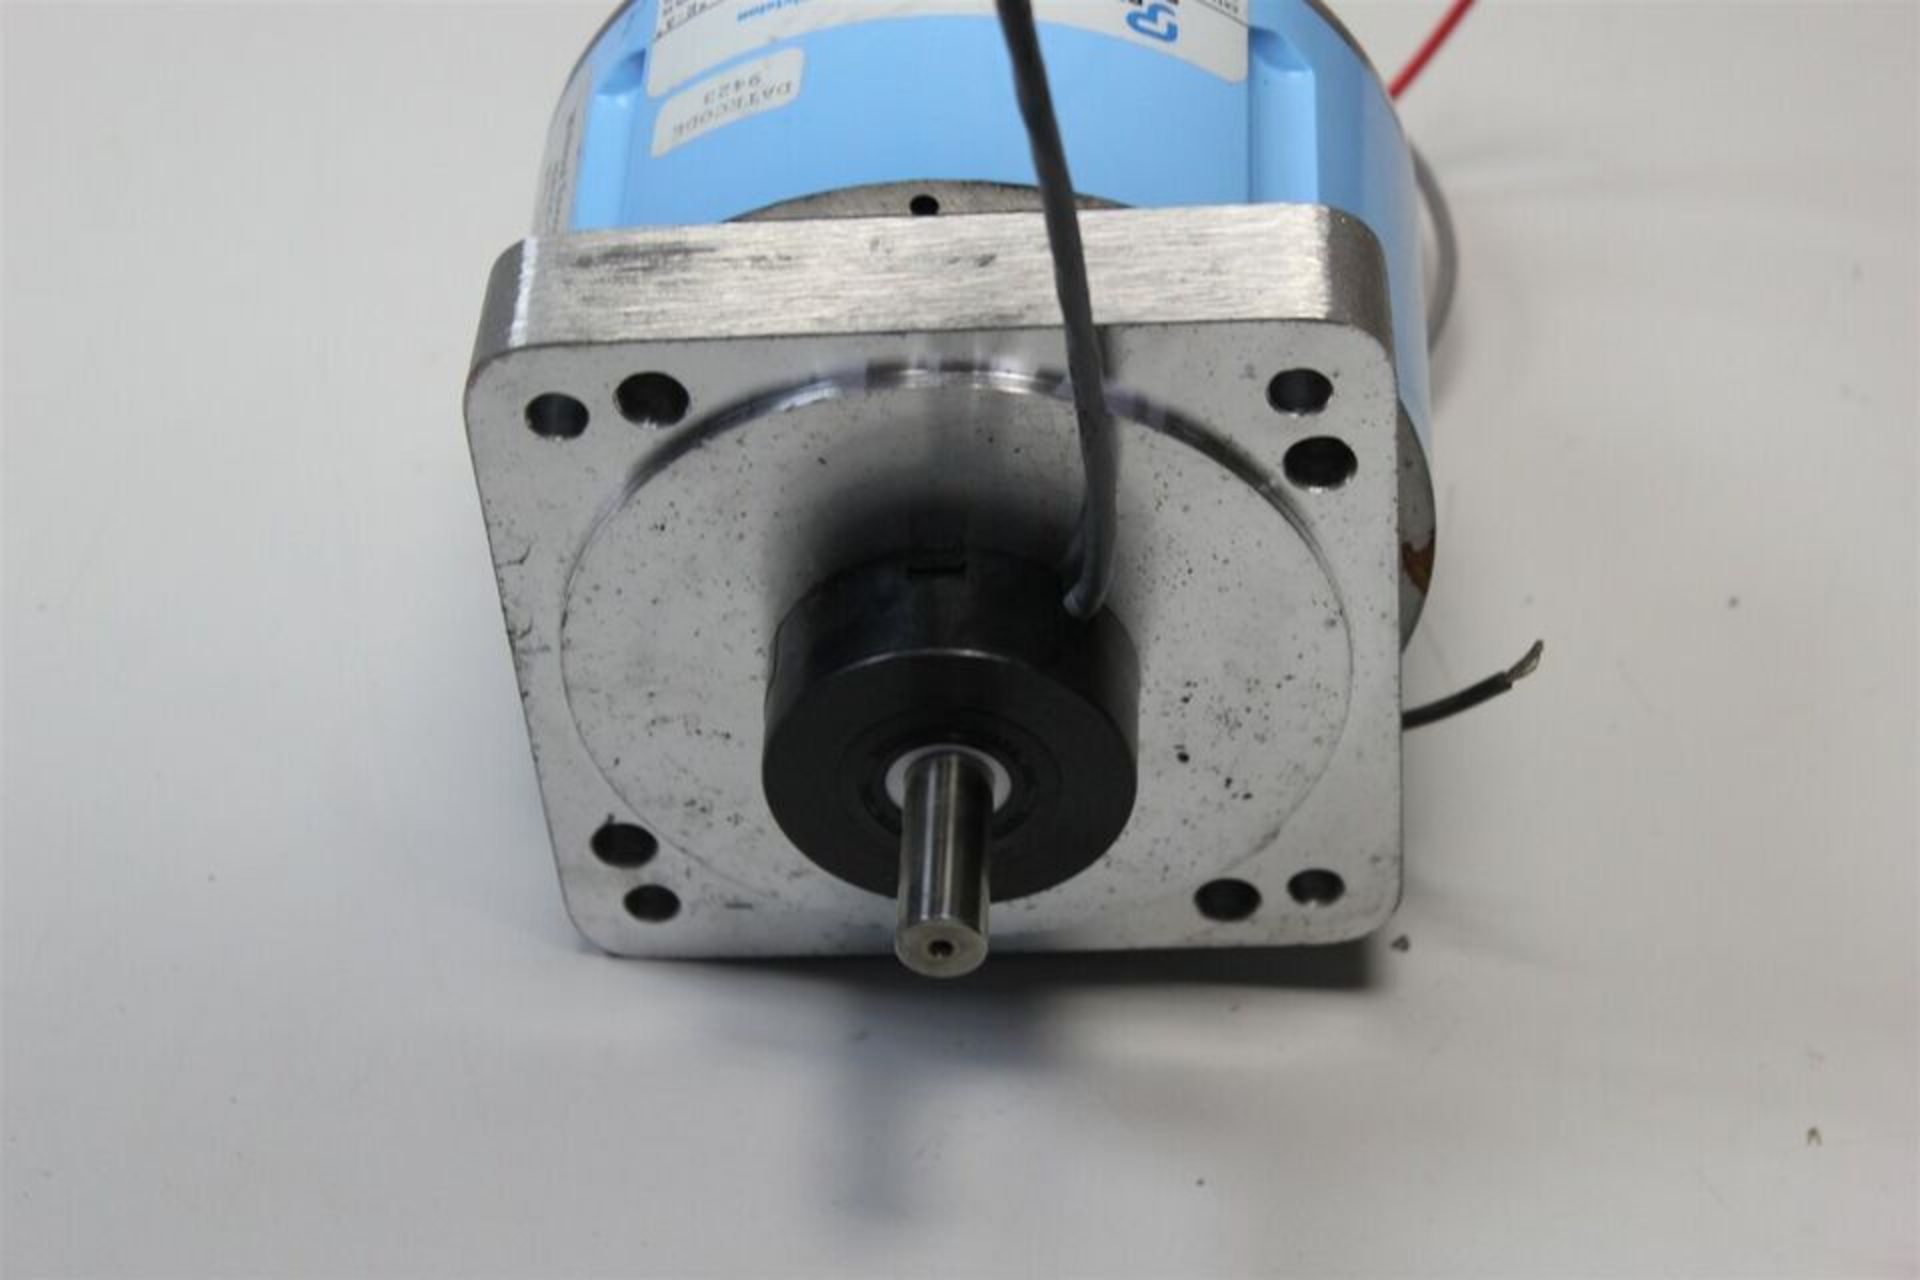 PACIFIC SCIENTIFIC SERVO MOTOR WITH TACHOMETER - Image 2 of 4